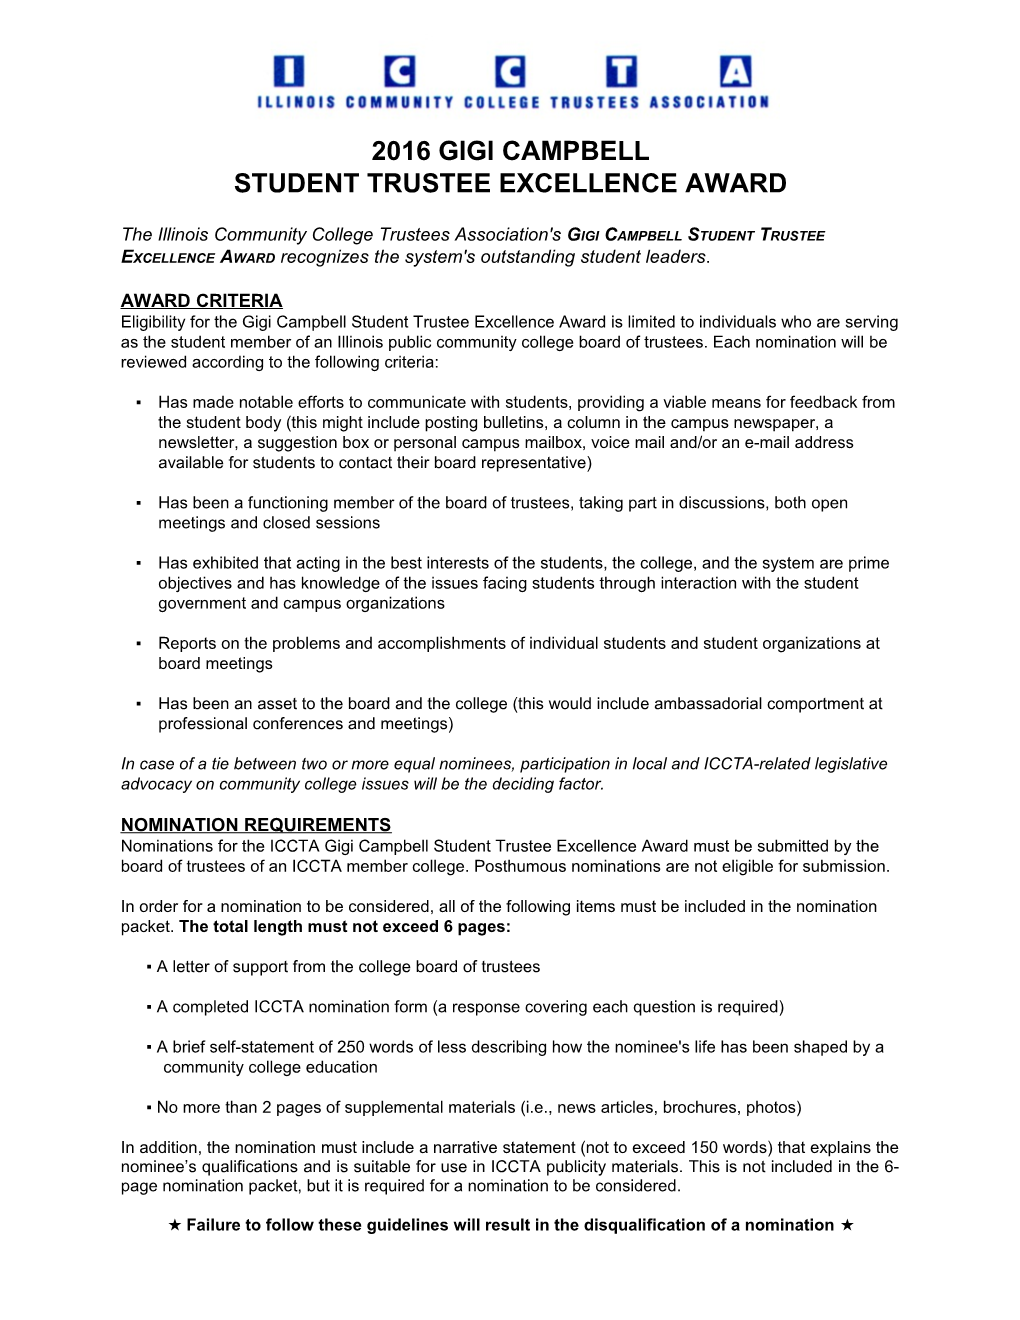 Student Trustee Excellence Award